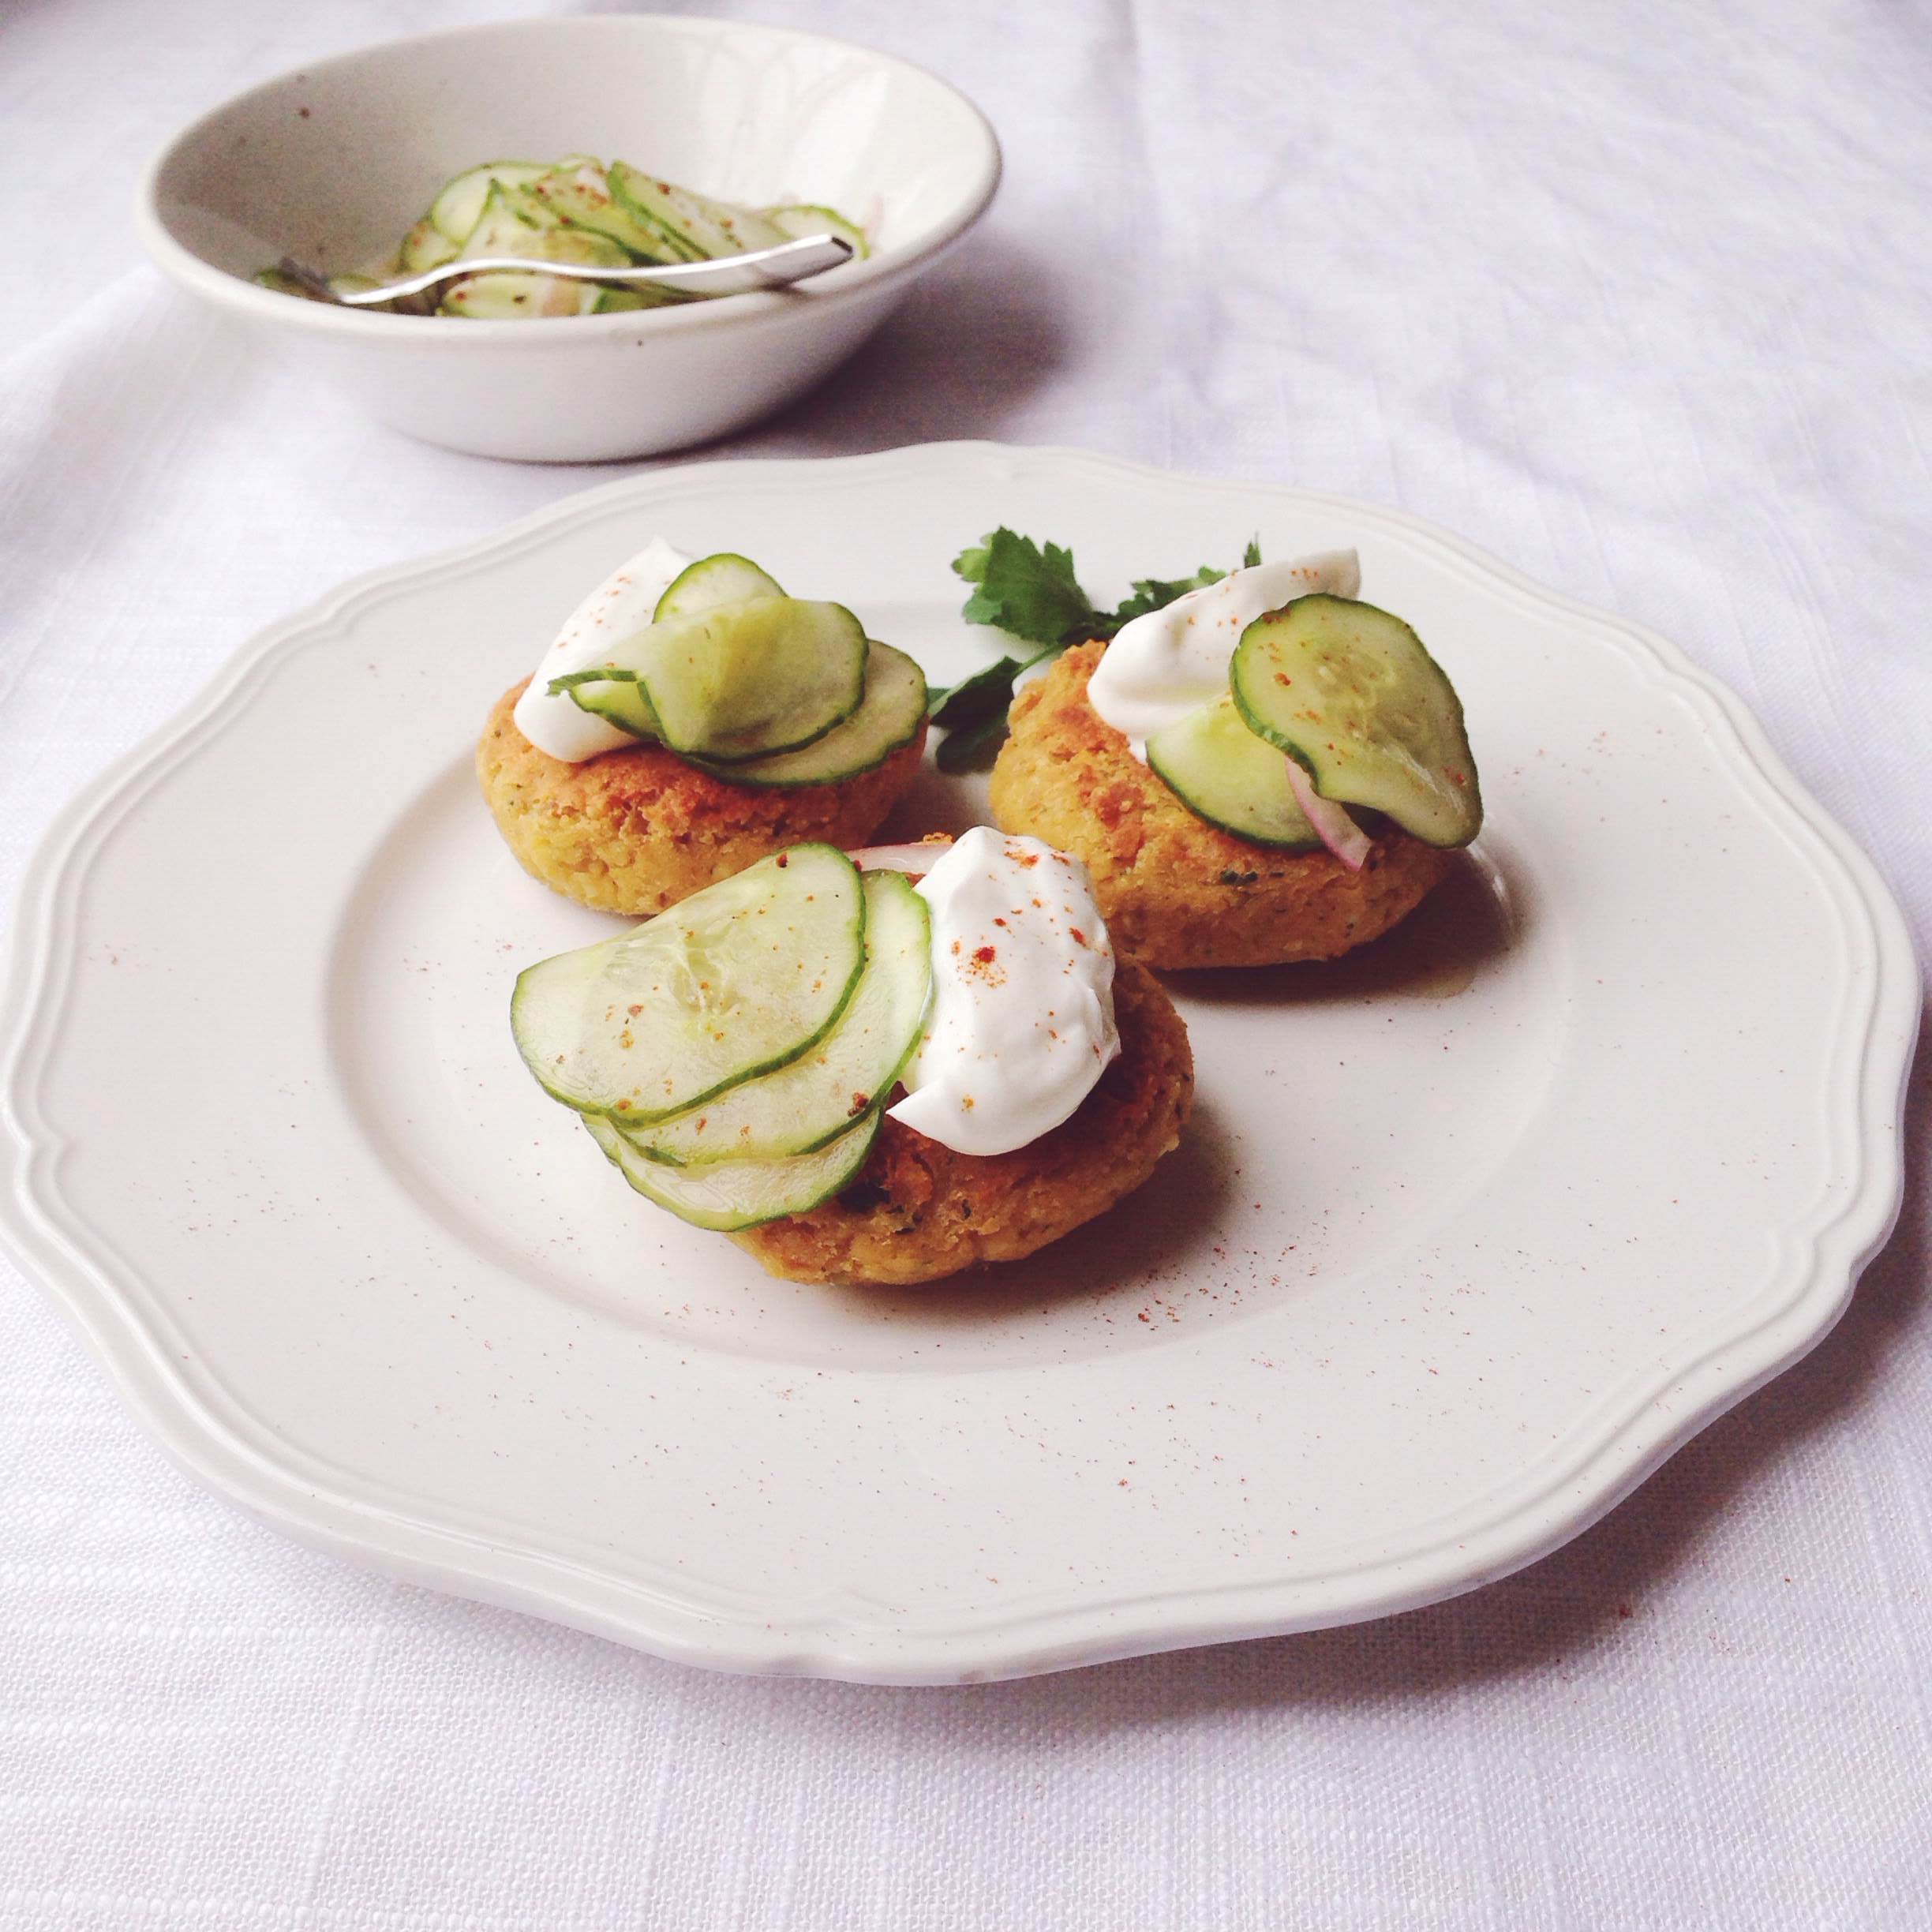 Chickpea Patties with Smoked Paprika and Feta Cheese + Greek Yogurt and Cucumber-Red Onion Relish